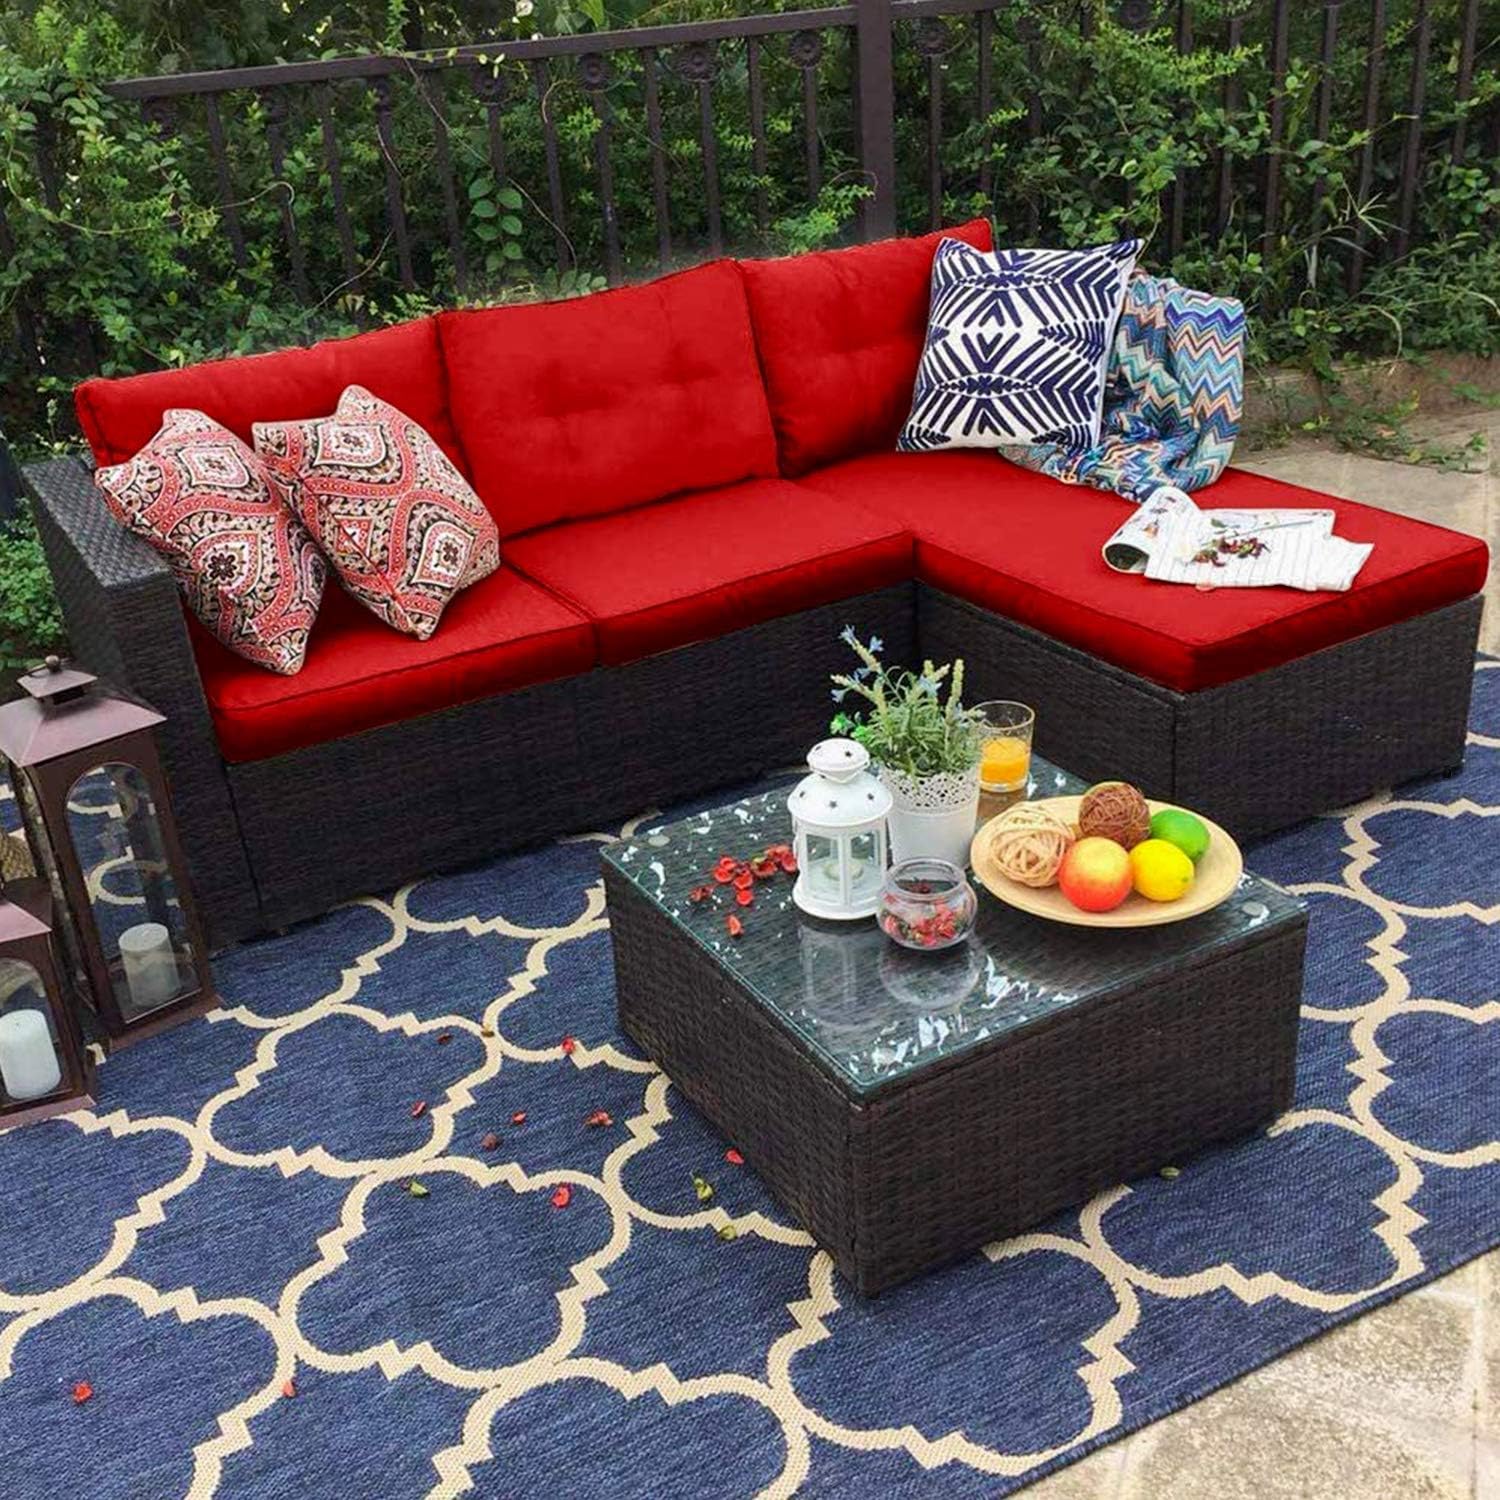 PHI VILLA Patio Sofa Set,3 Pieces All-Weather Upgrade Wicker Outdoor Sectional Sofa,L-Shaped Small Patio Conversation Furniture Set with Cushion and Coffee Table(Red)